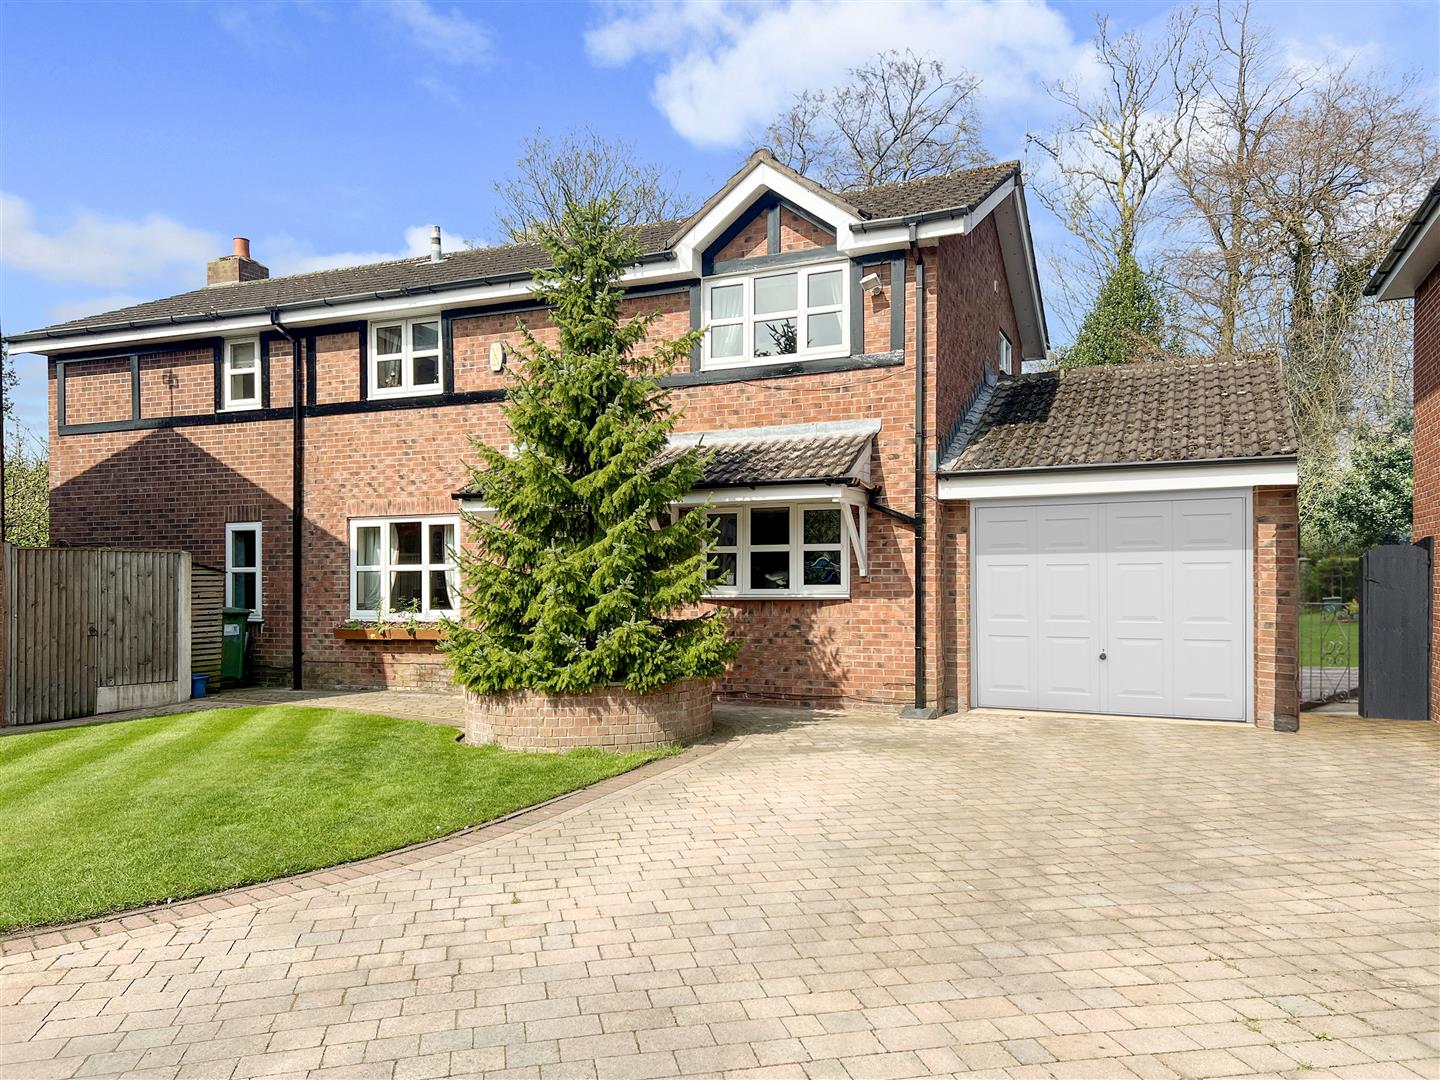 4 bed detached house for sale in Medway Crescent, Altrincham - Property Image 1